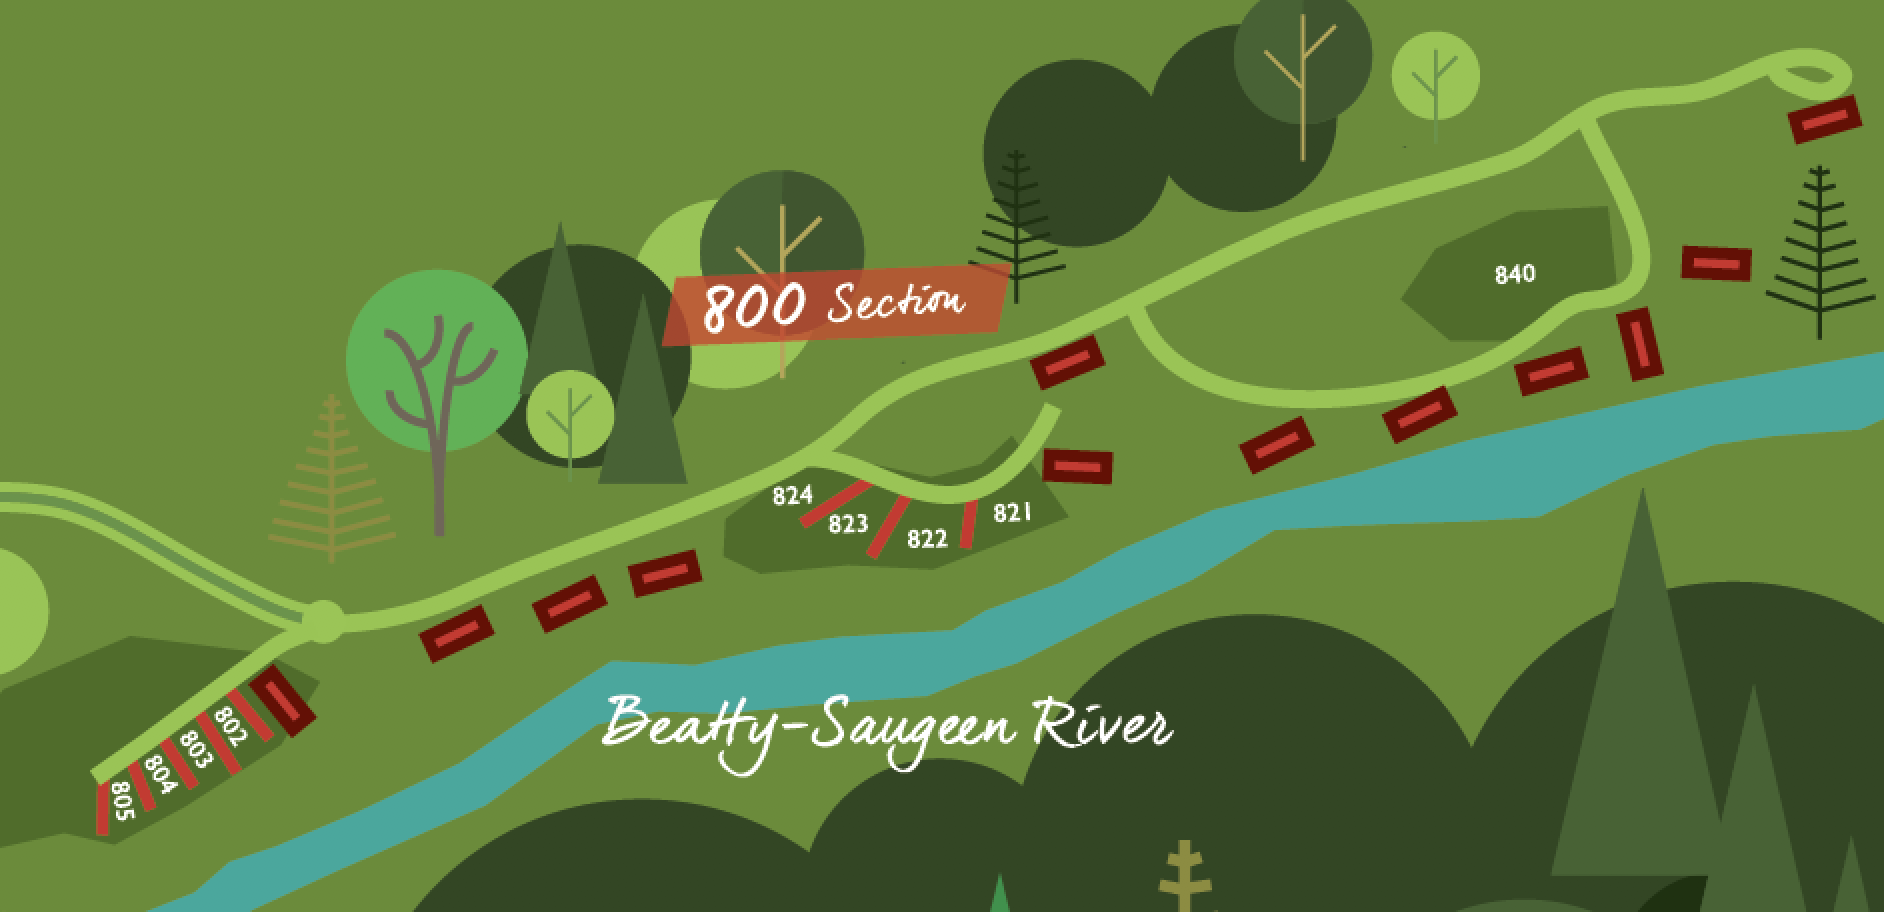 River Place 800s overnight sites 2019 02